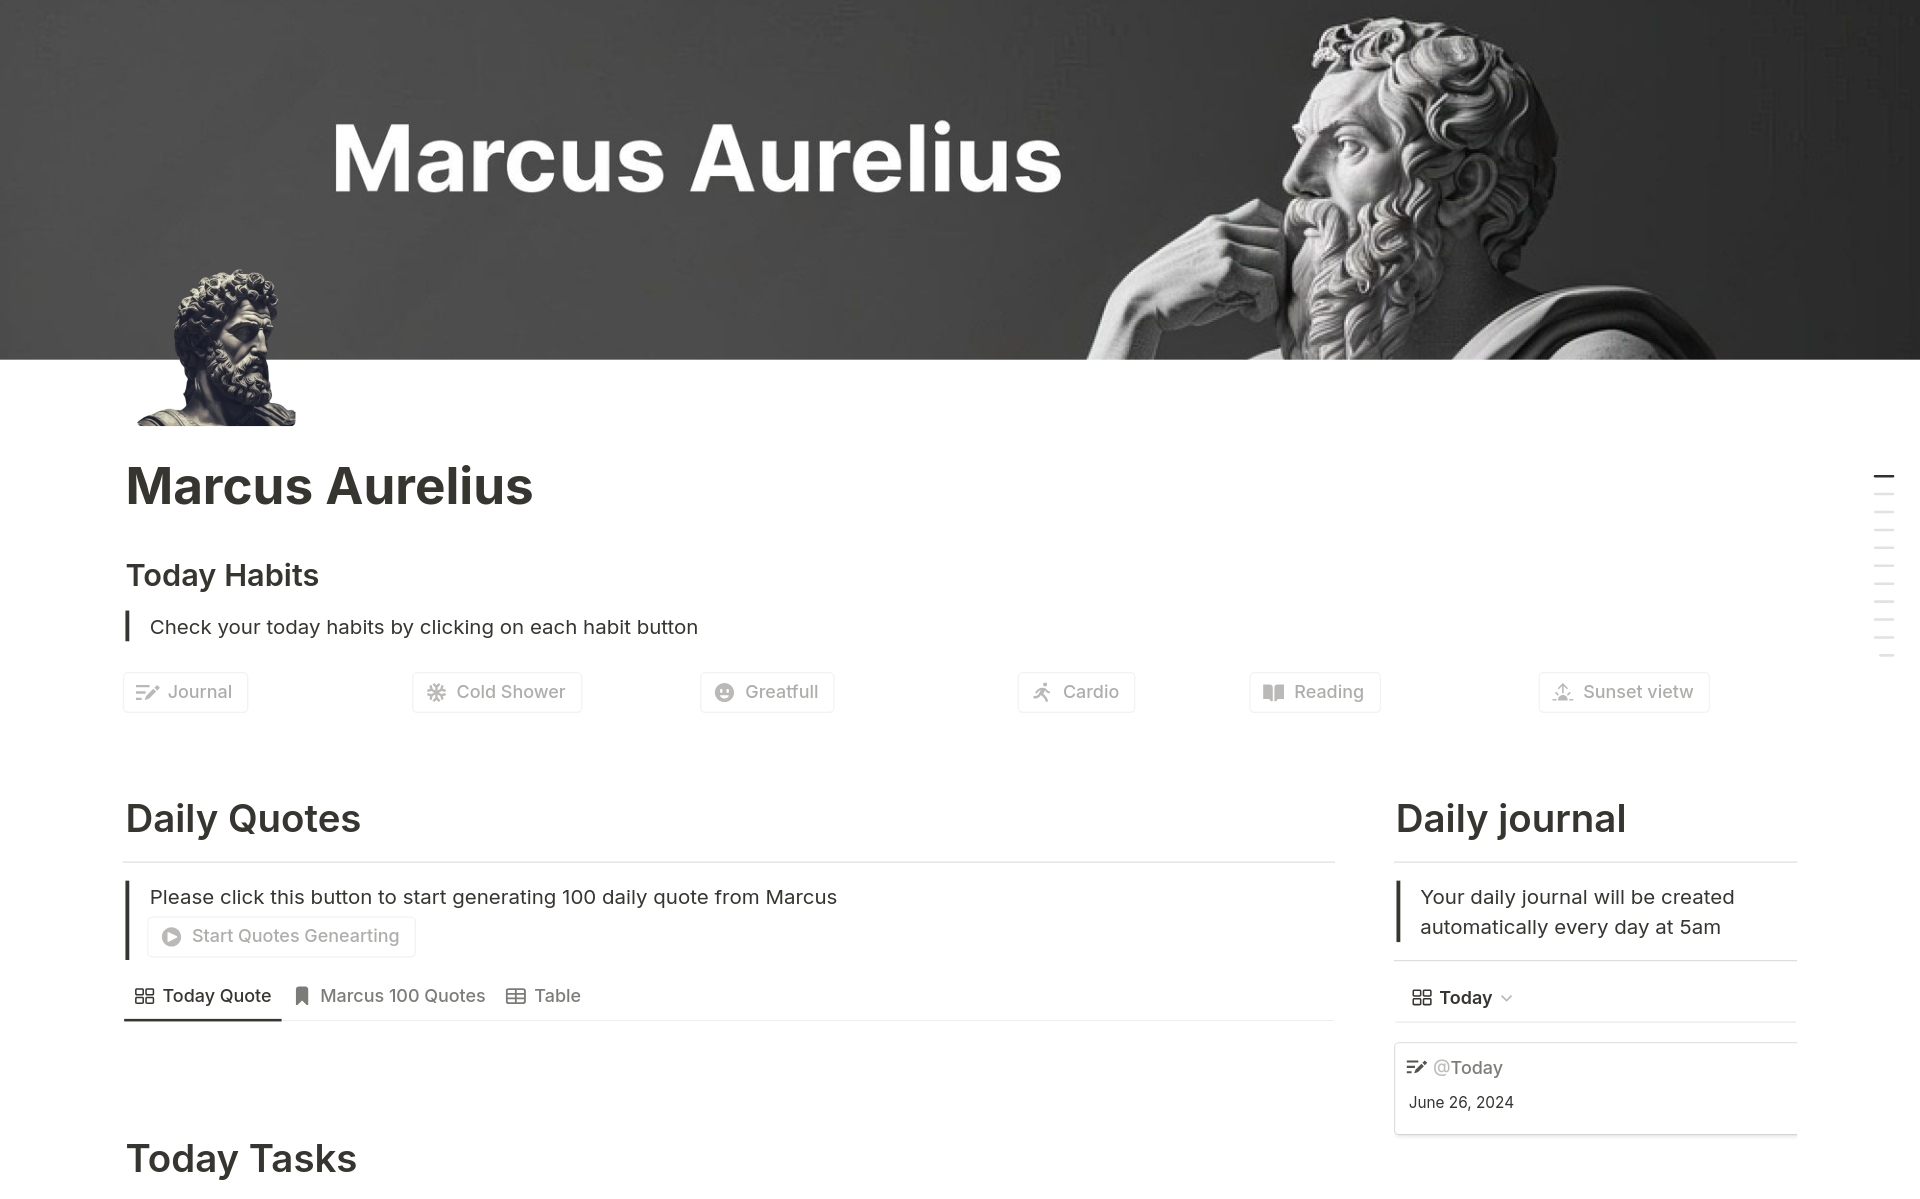 Marcus Aurelius's journaling and philosophical wisdom can help you stay productive and focused I transformed his teachings into a practical Free Notion template